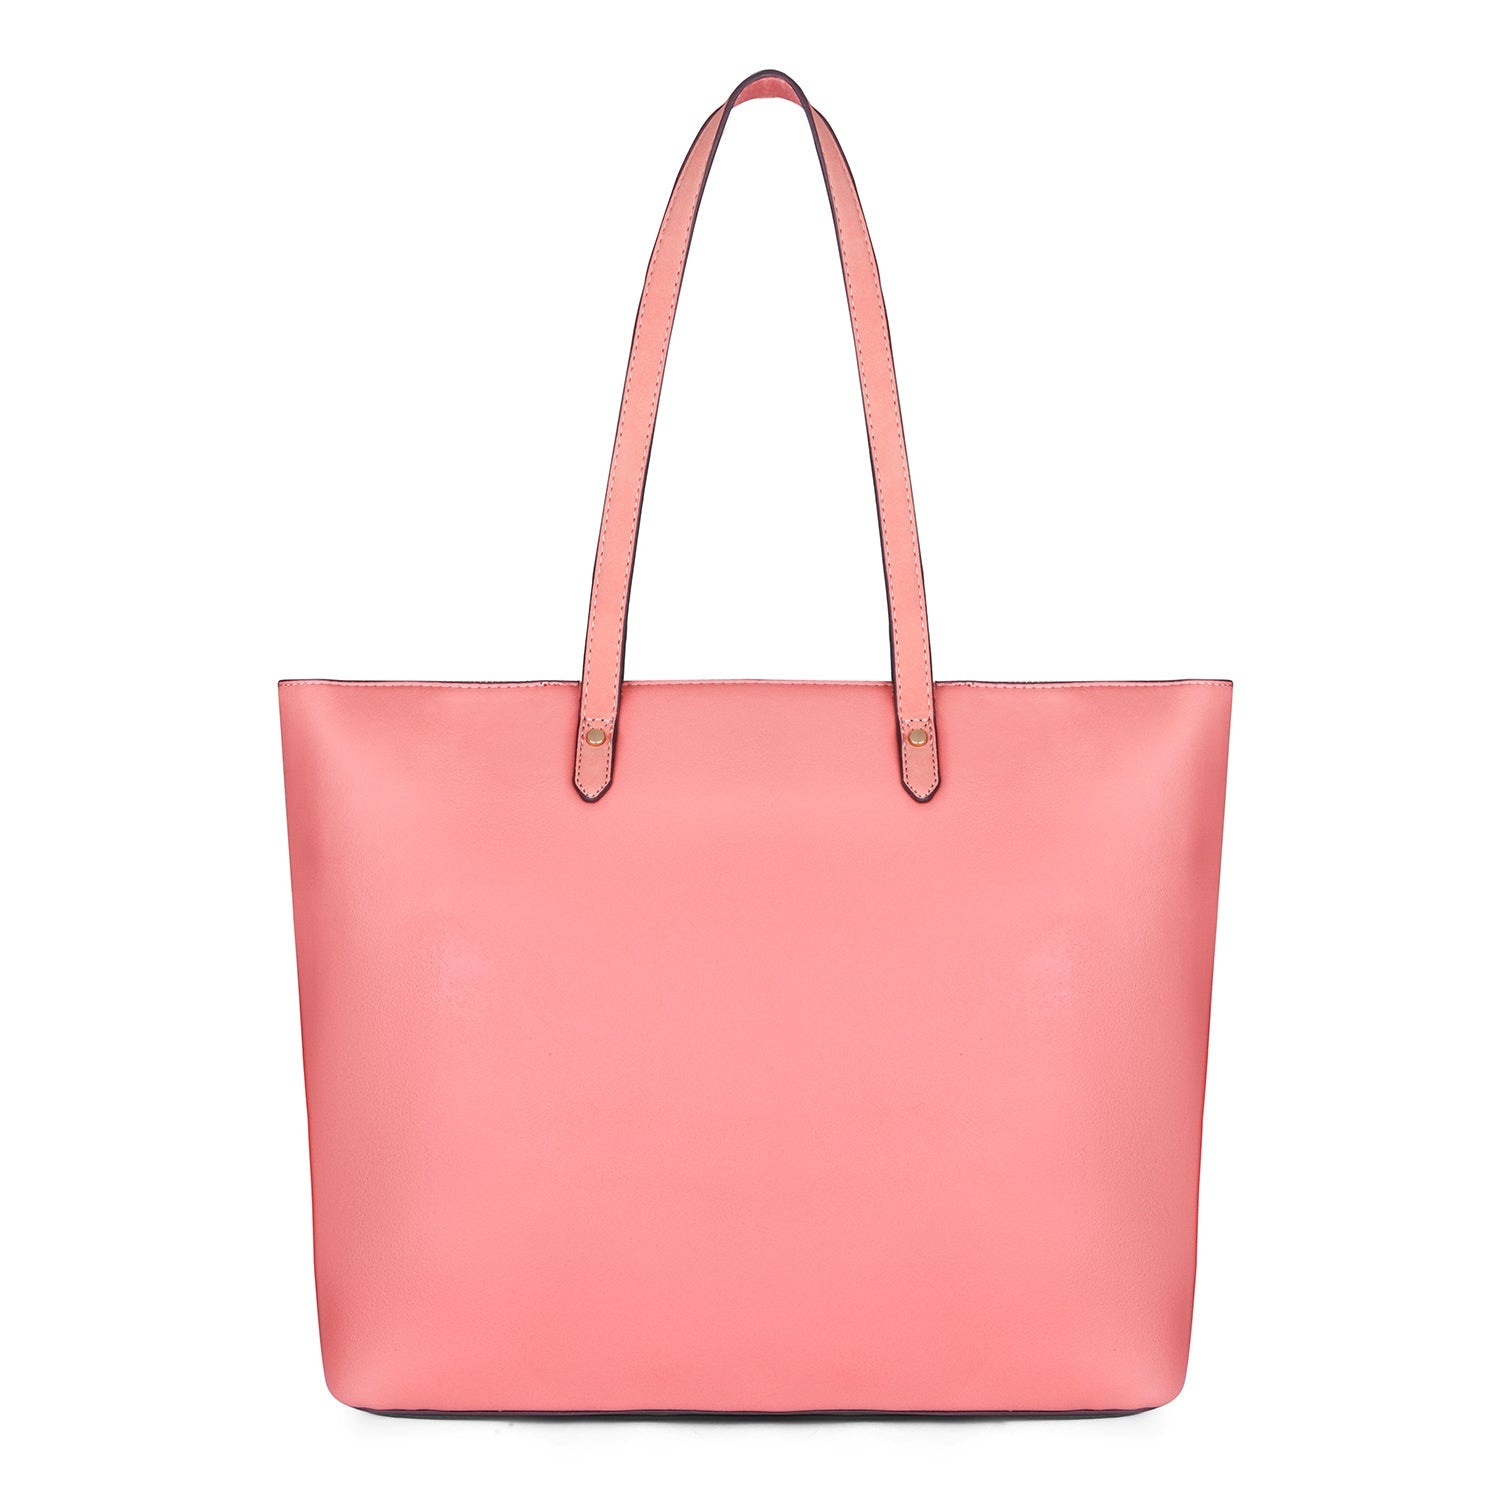 Accessorize London Women's Faux Leather Coral Spacious Emily Tote Bag